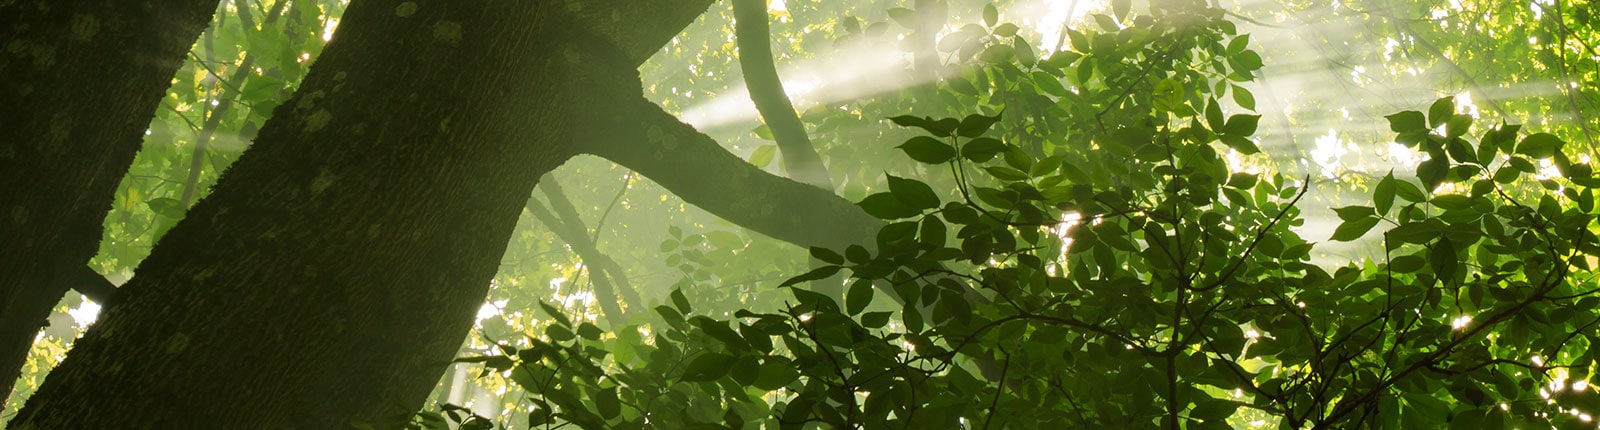 Sunbeams streaming though the canopy in the tropical forest reserve in San Juan, Puerto Rico